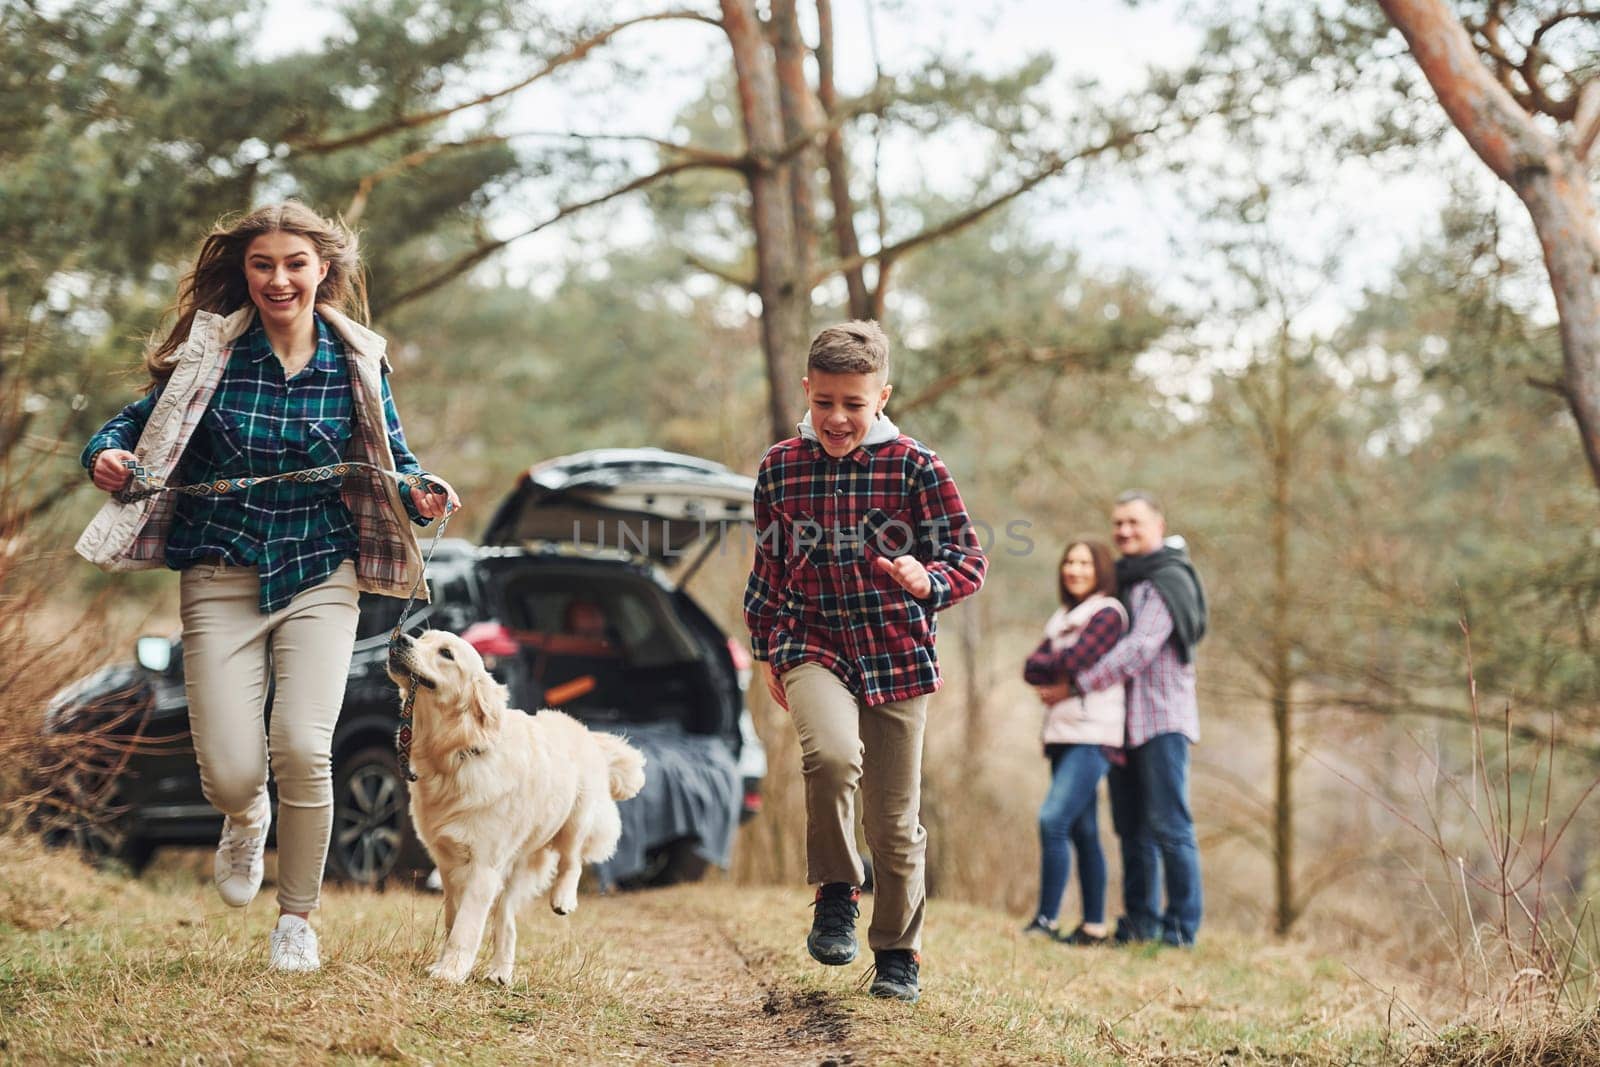 Sister and brother runs forward. Happy family have fun with their dog near modern car outdoors in forest.